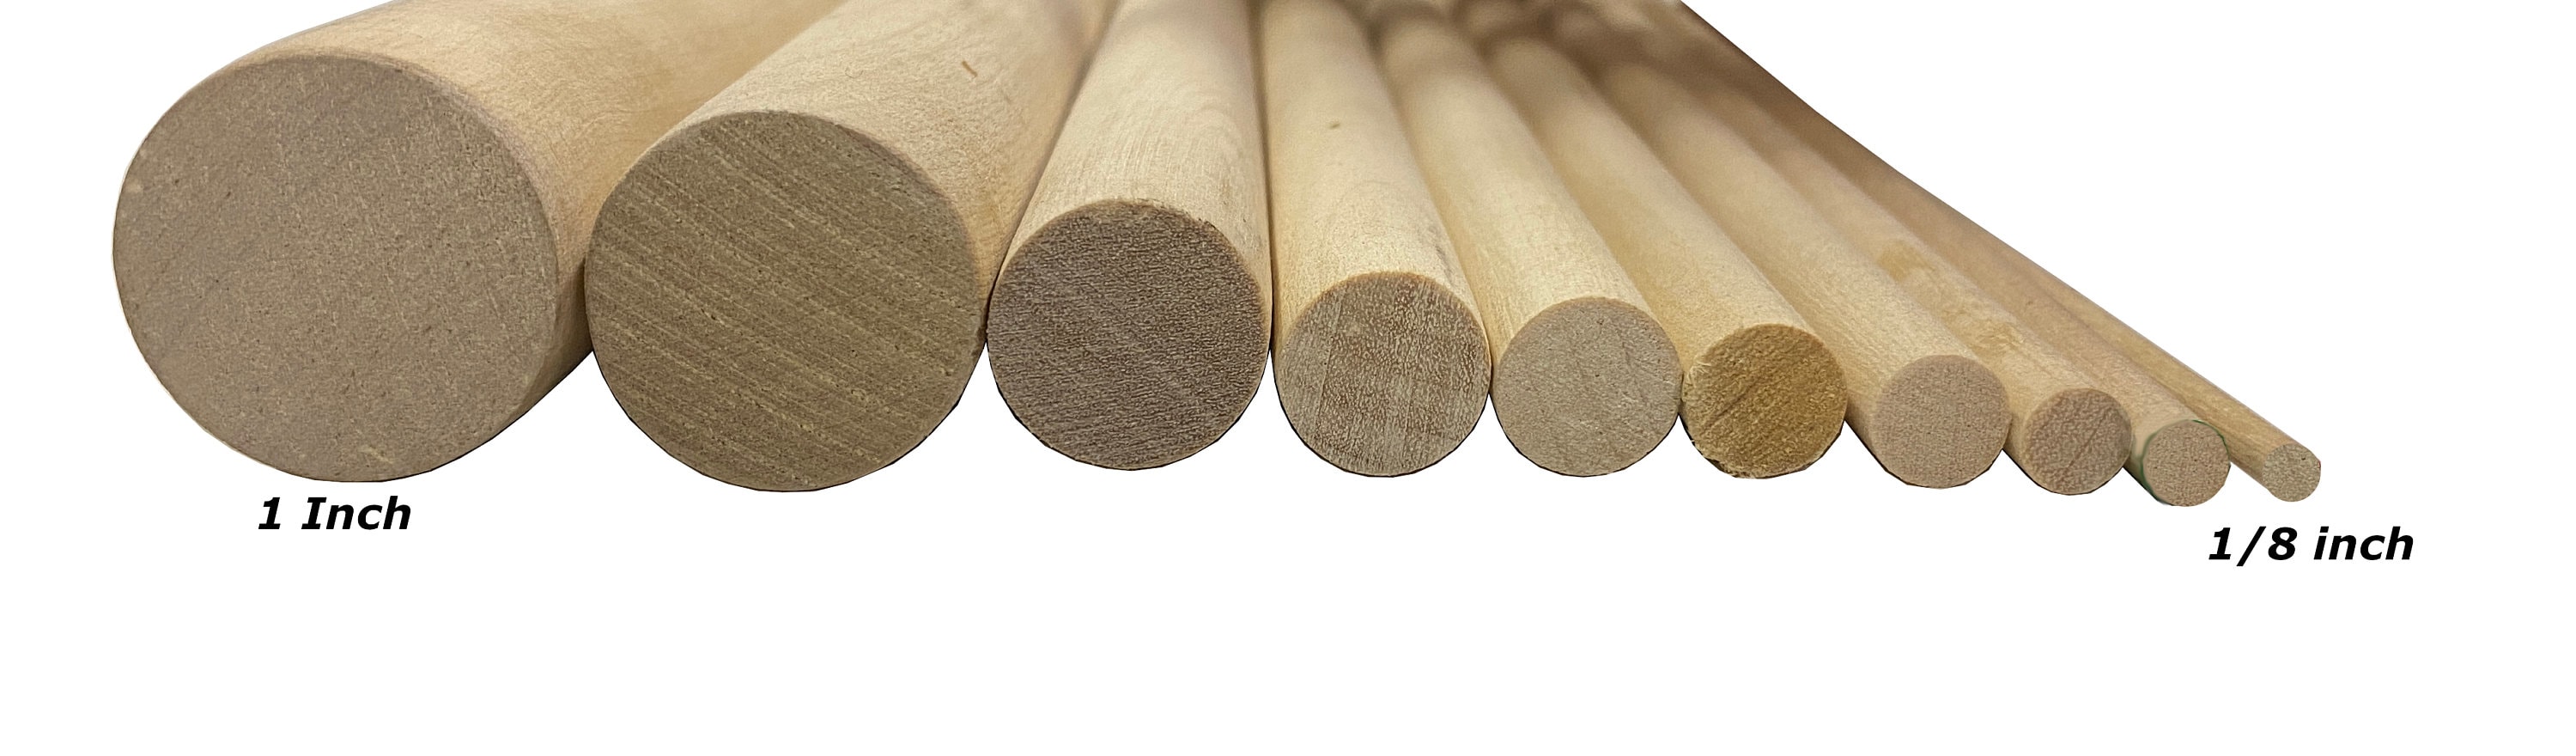 Round Wooden Dowel Rods for Crafting, 240 Pc